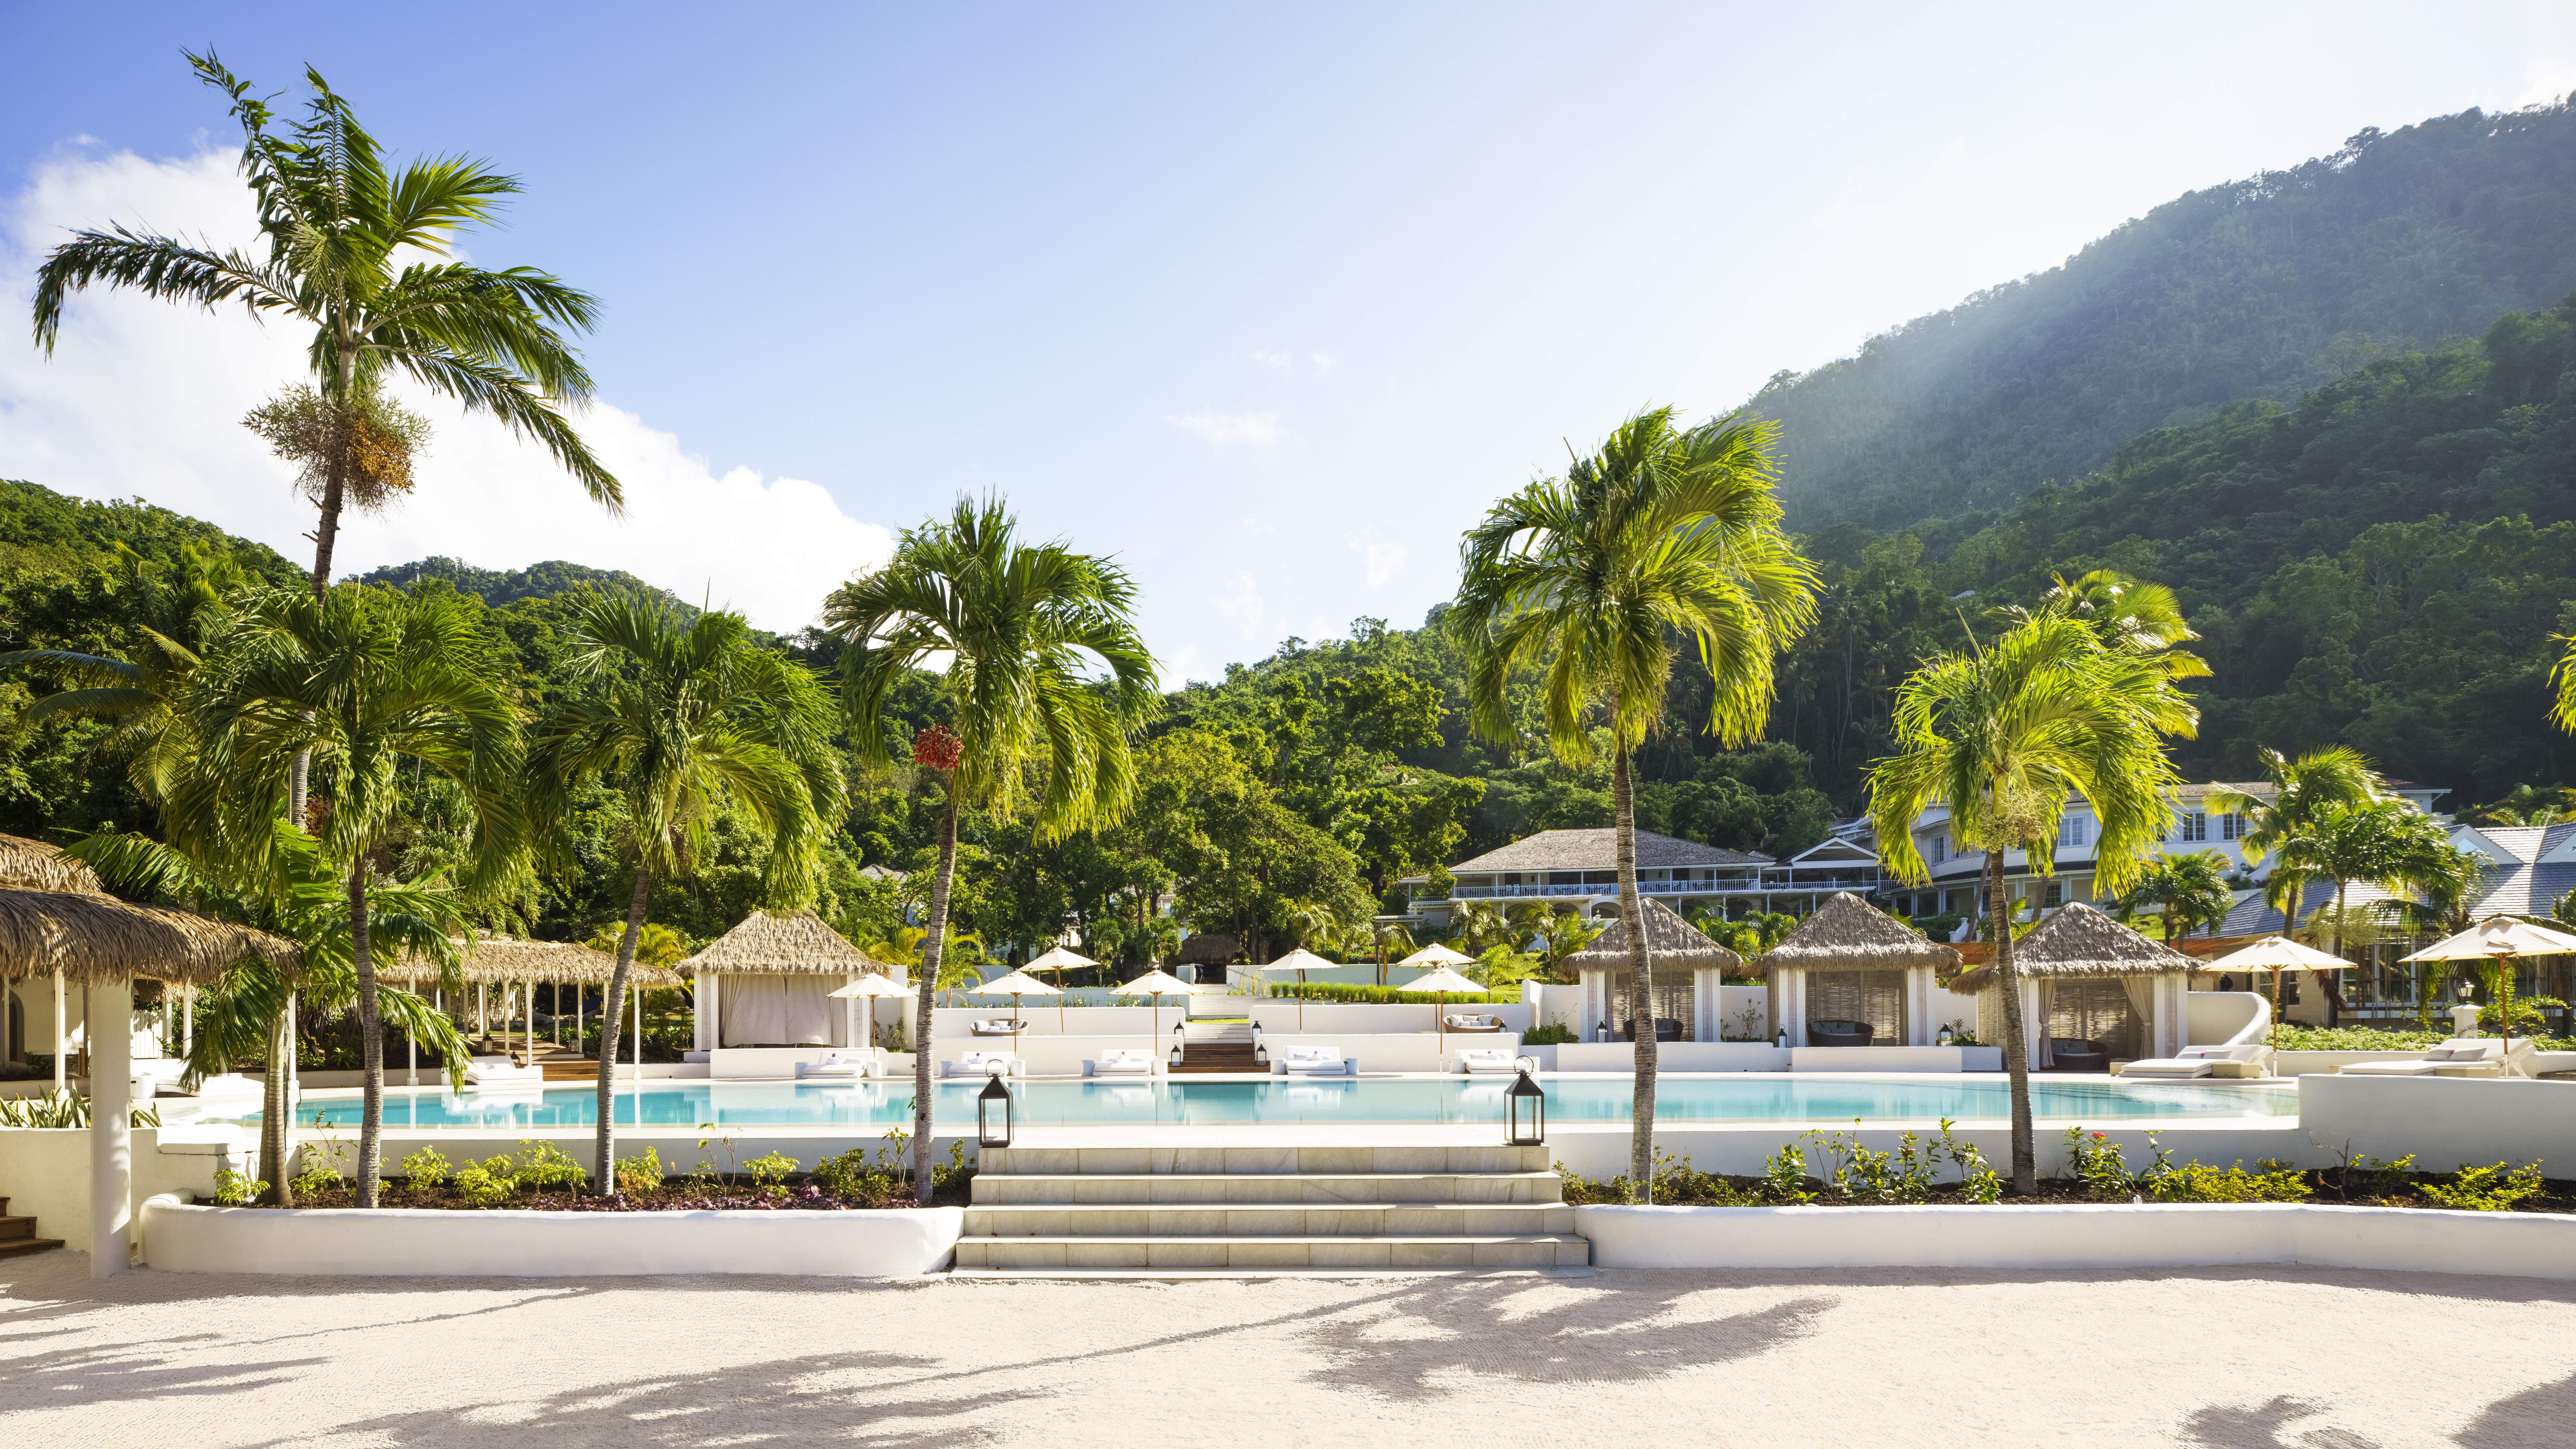 Treat yourself to a winter vacation this year at Sugar Beach, A Viceroy Resort, St. Lucia, set in over 100 acres of tropical rainforest overlooking the Caribbean and the spectacular Twin Pitons of St. Lucia. 